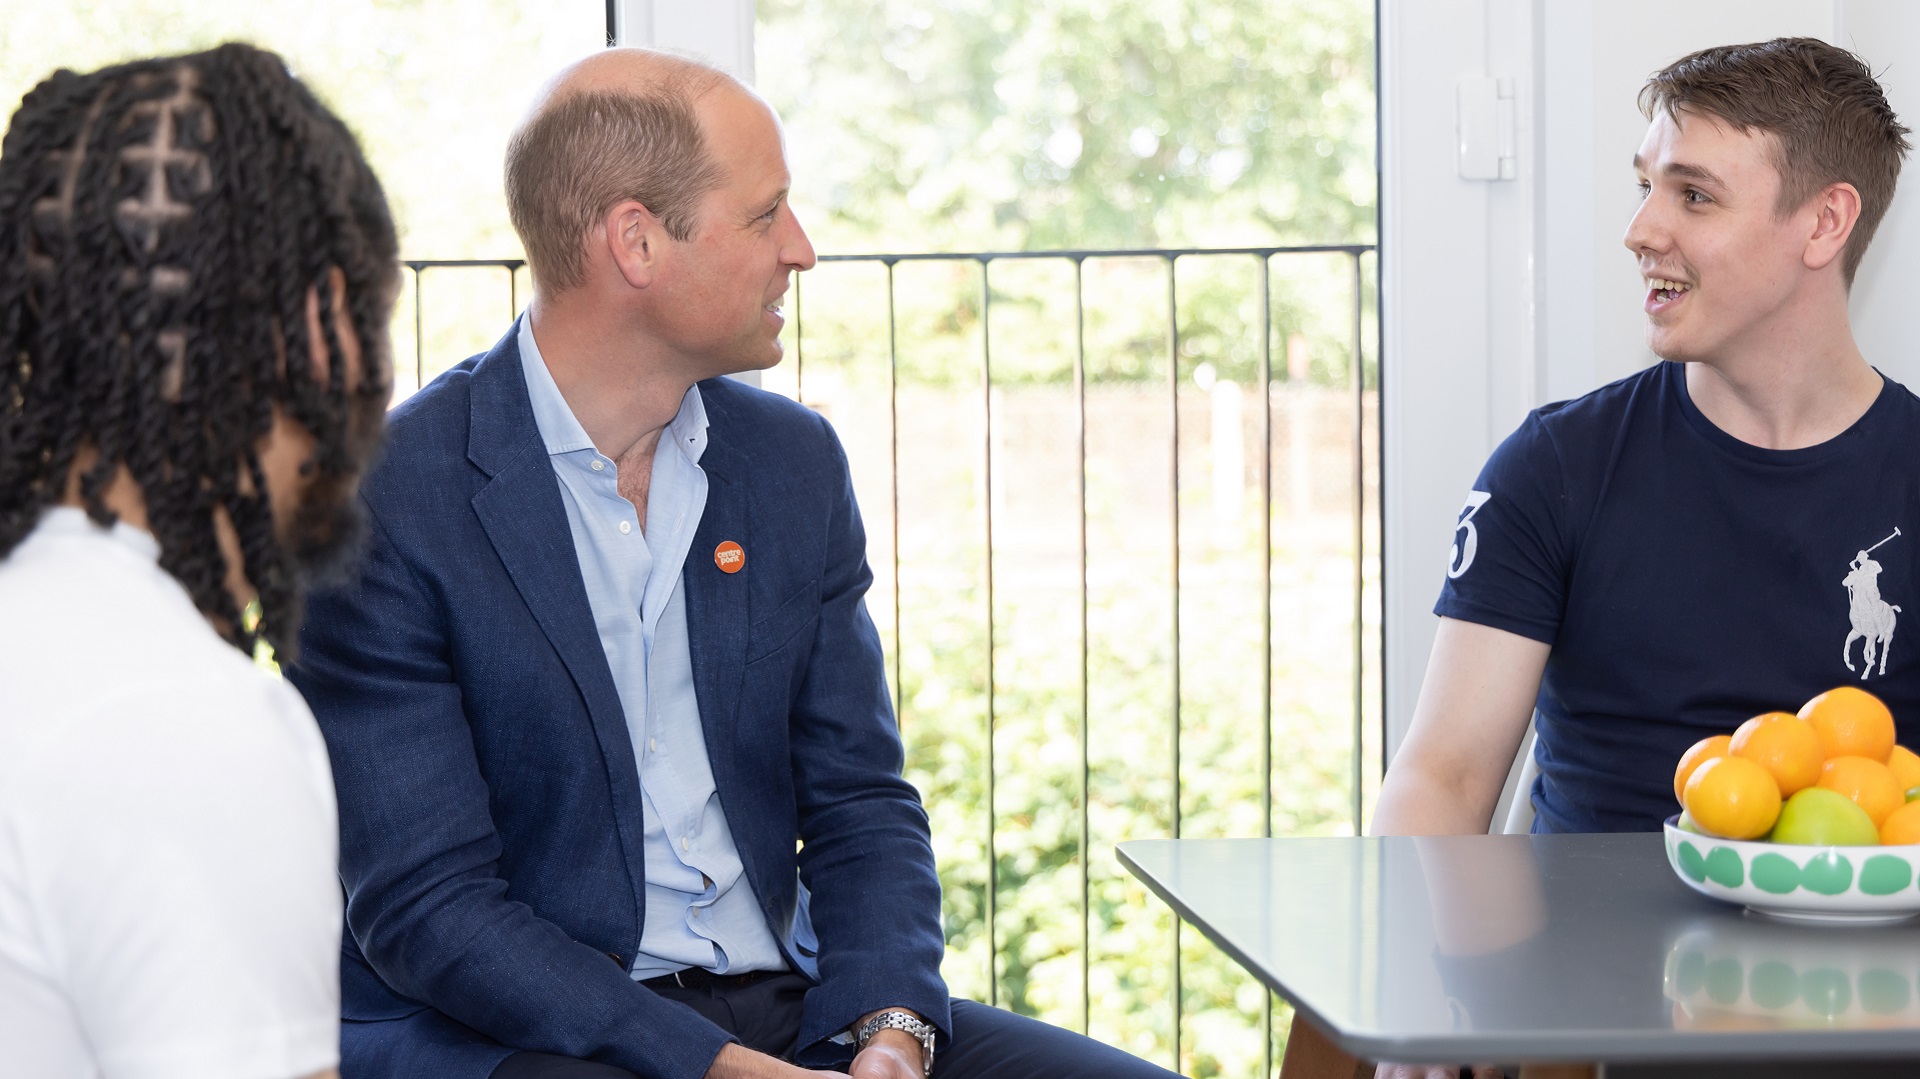 Prince William visiting Centrepoint's Reuben House